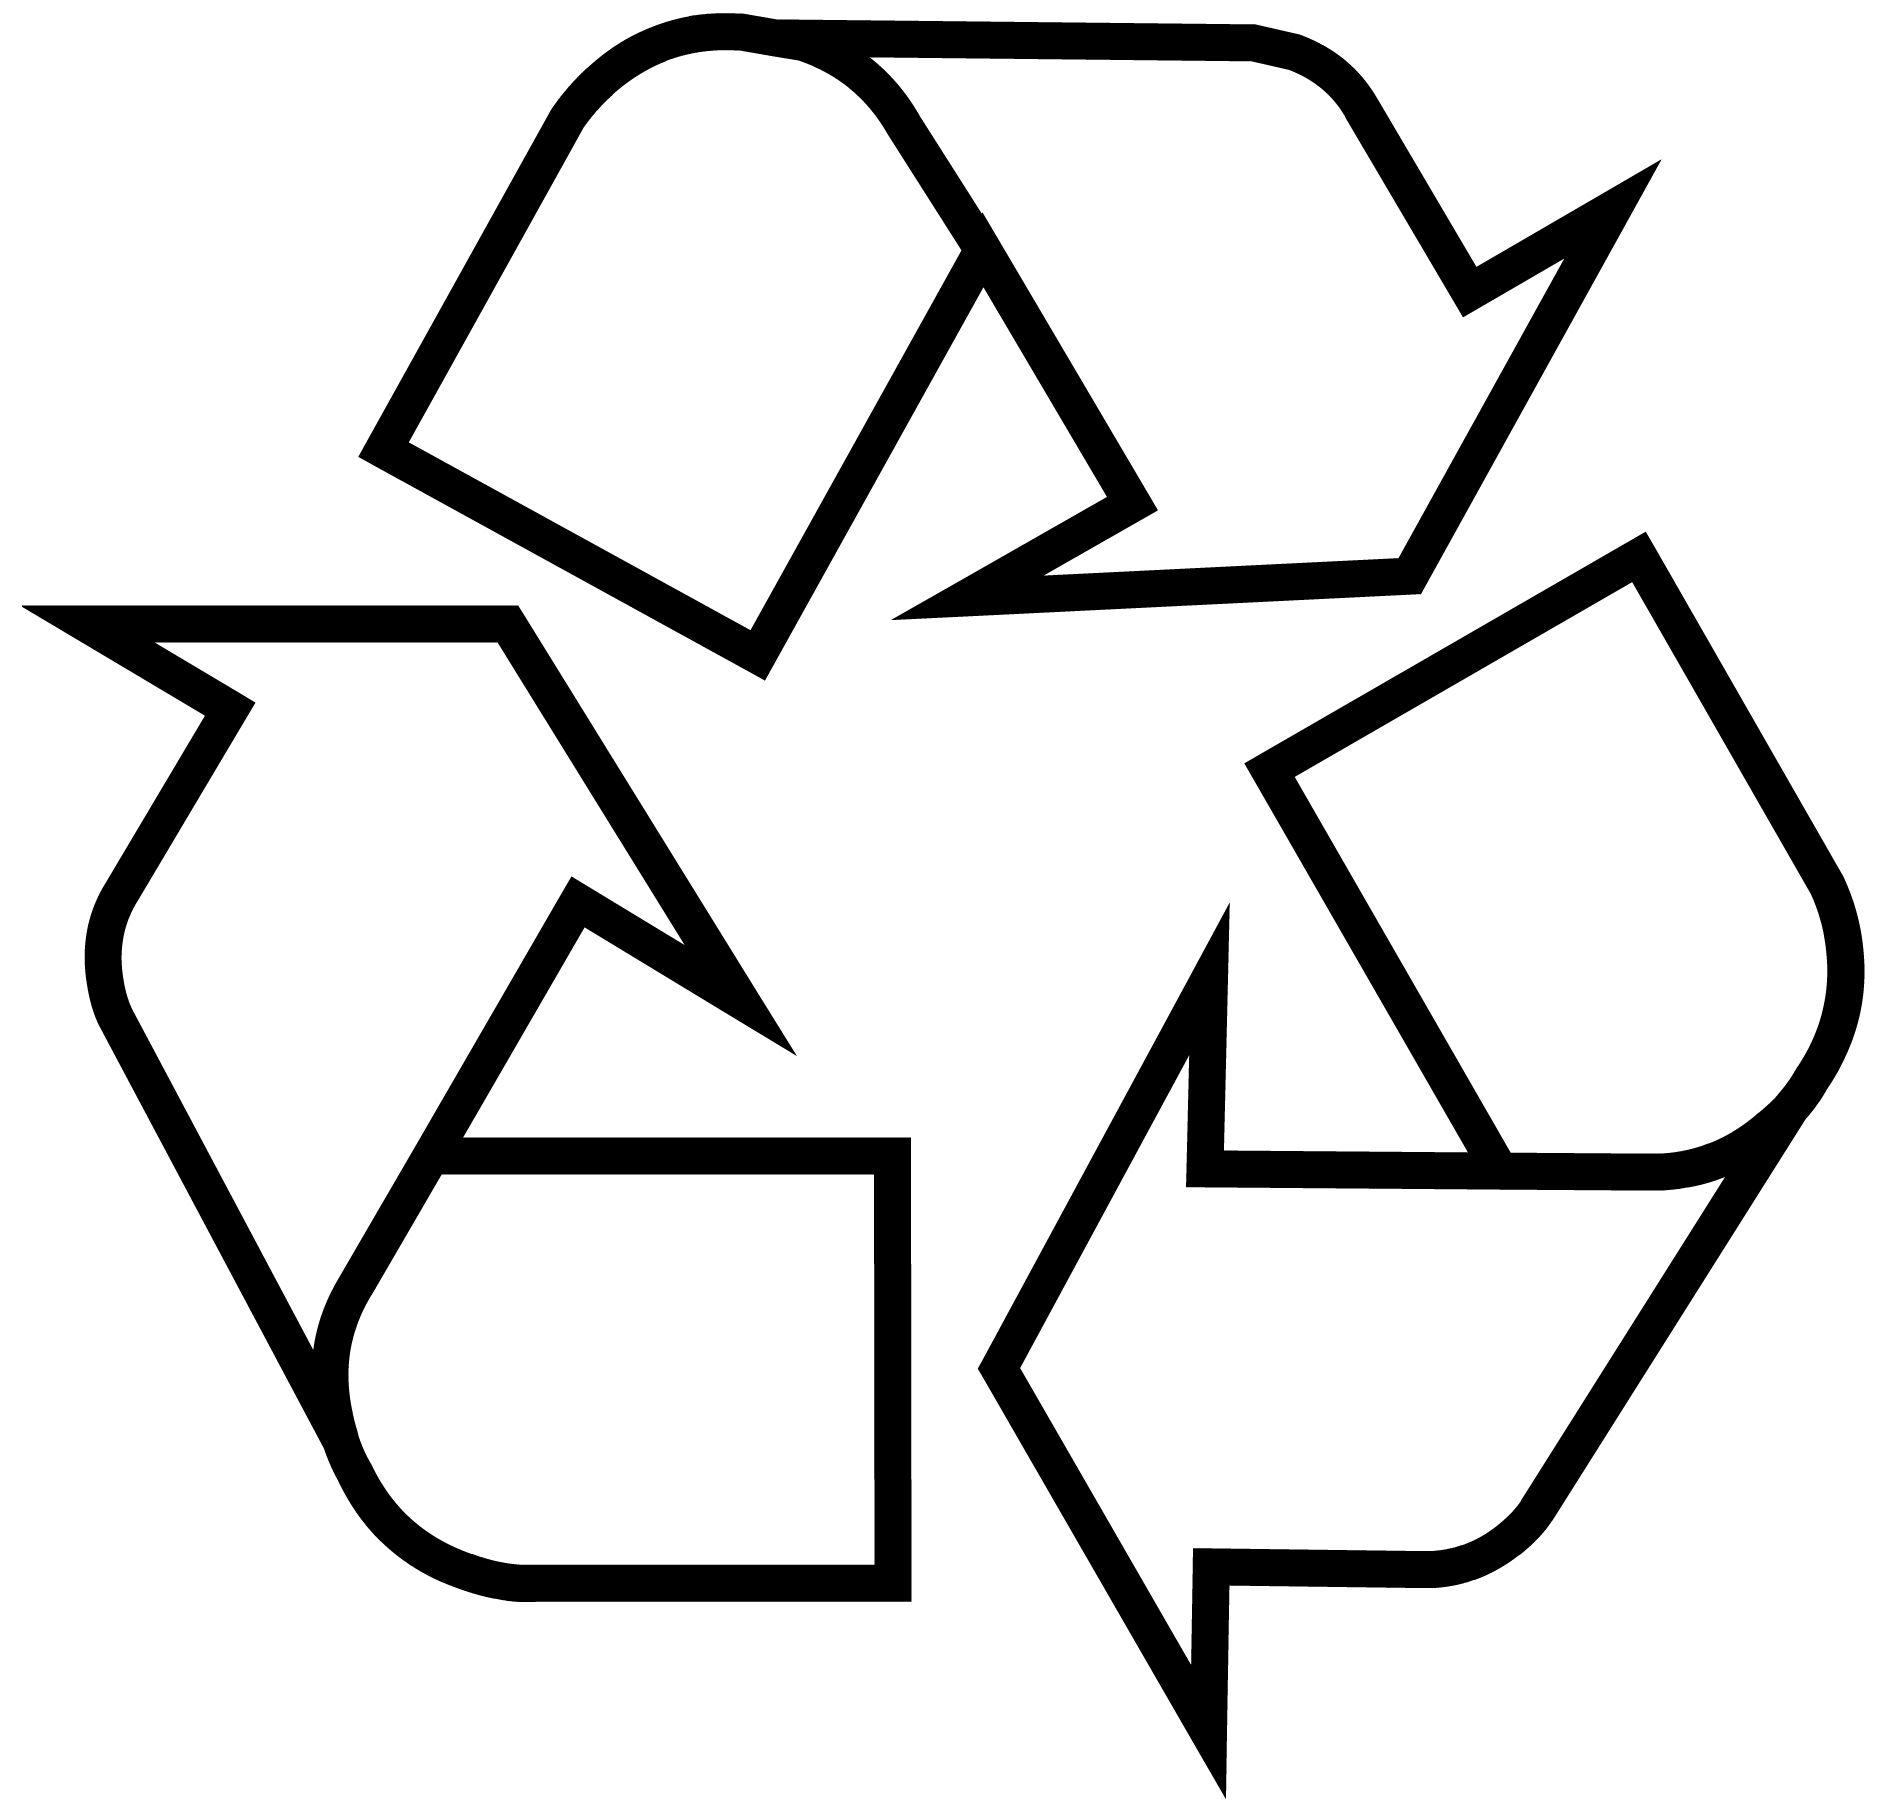 Recycle Logo - Recycling Symbol - Download the Original Recycle Logo